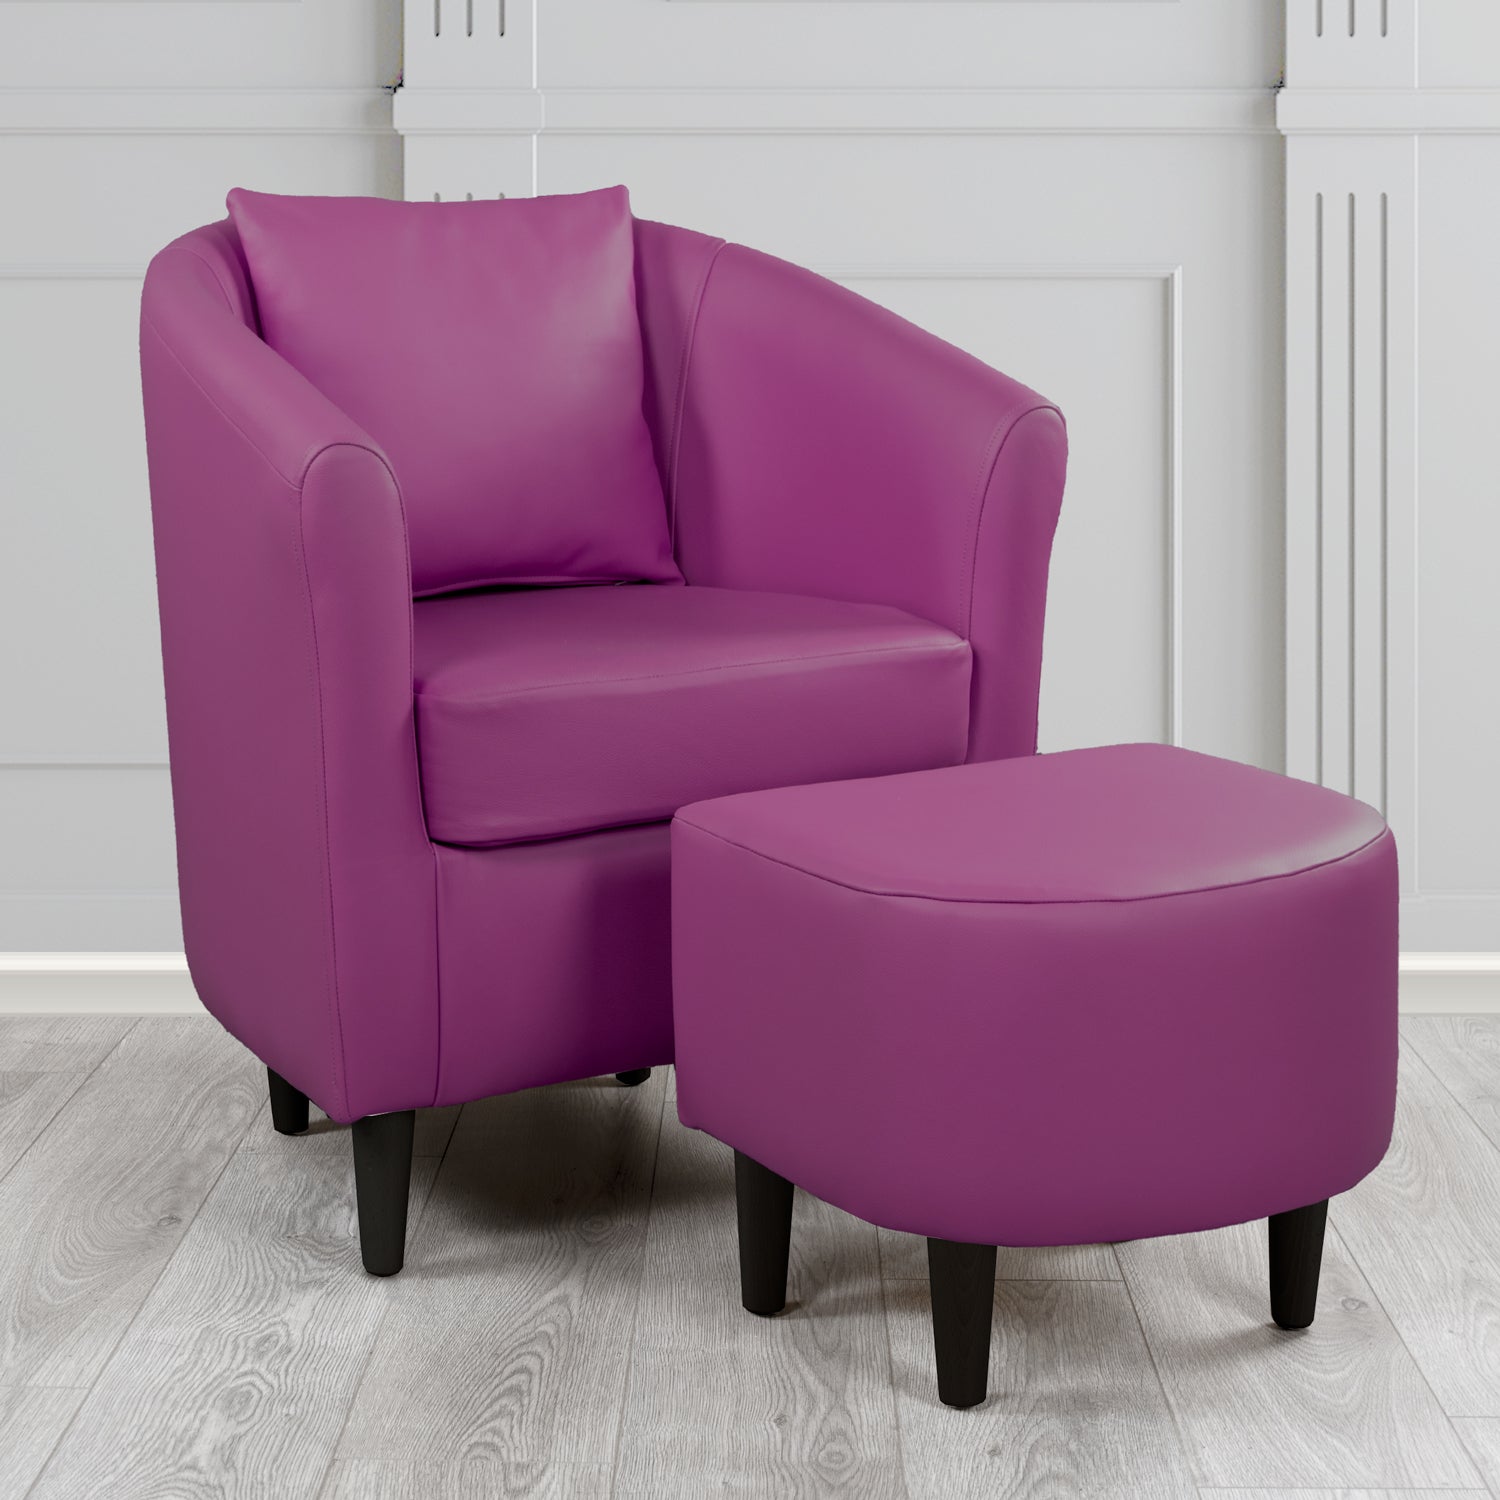 St Tropez Shelly Wineberry Crib 5 Genuine Leather Tub Chair & Footstool Set With Scatter Cushion (6619546779690)